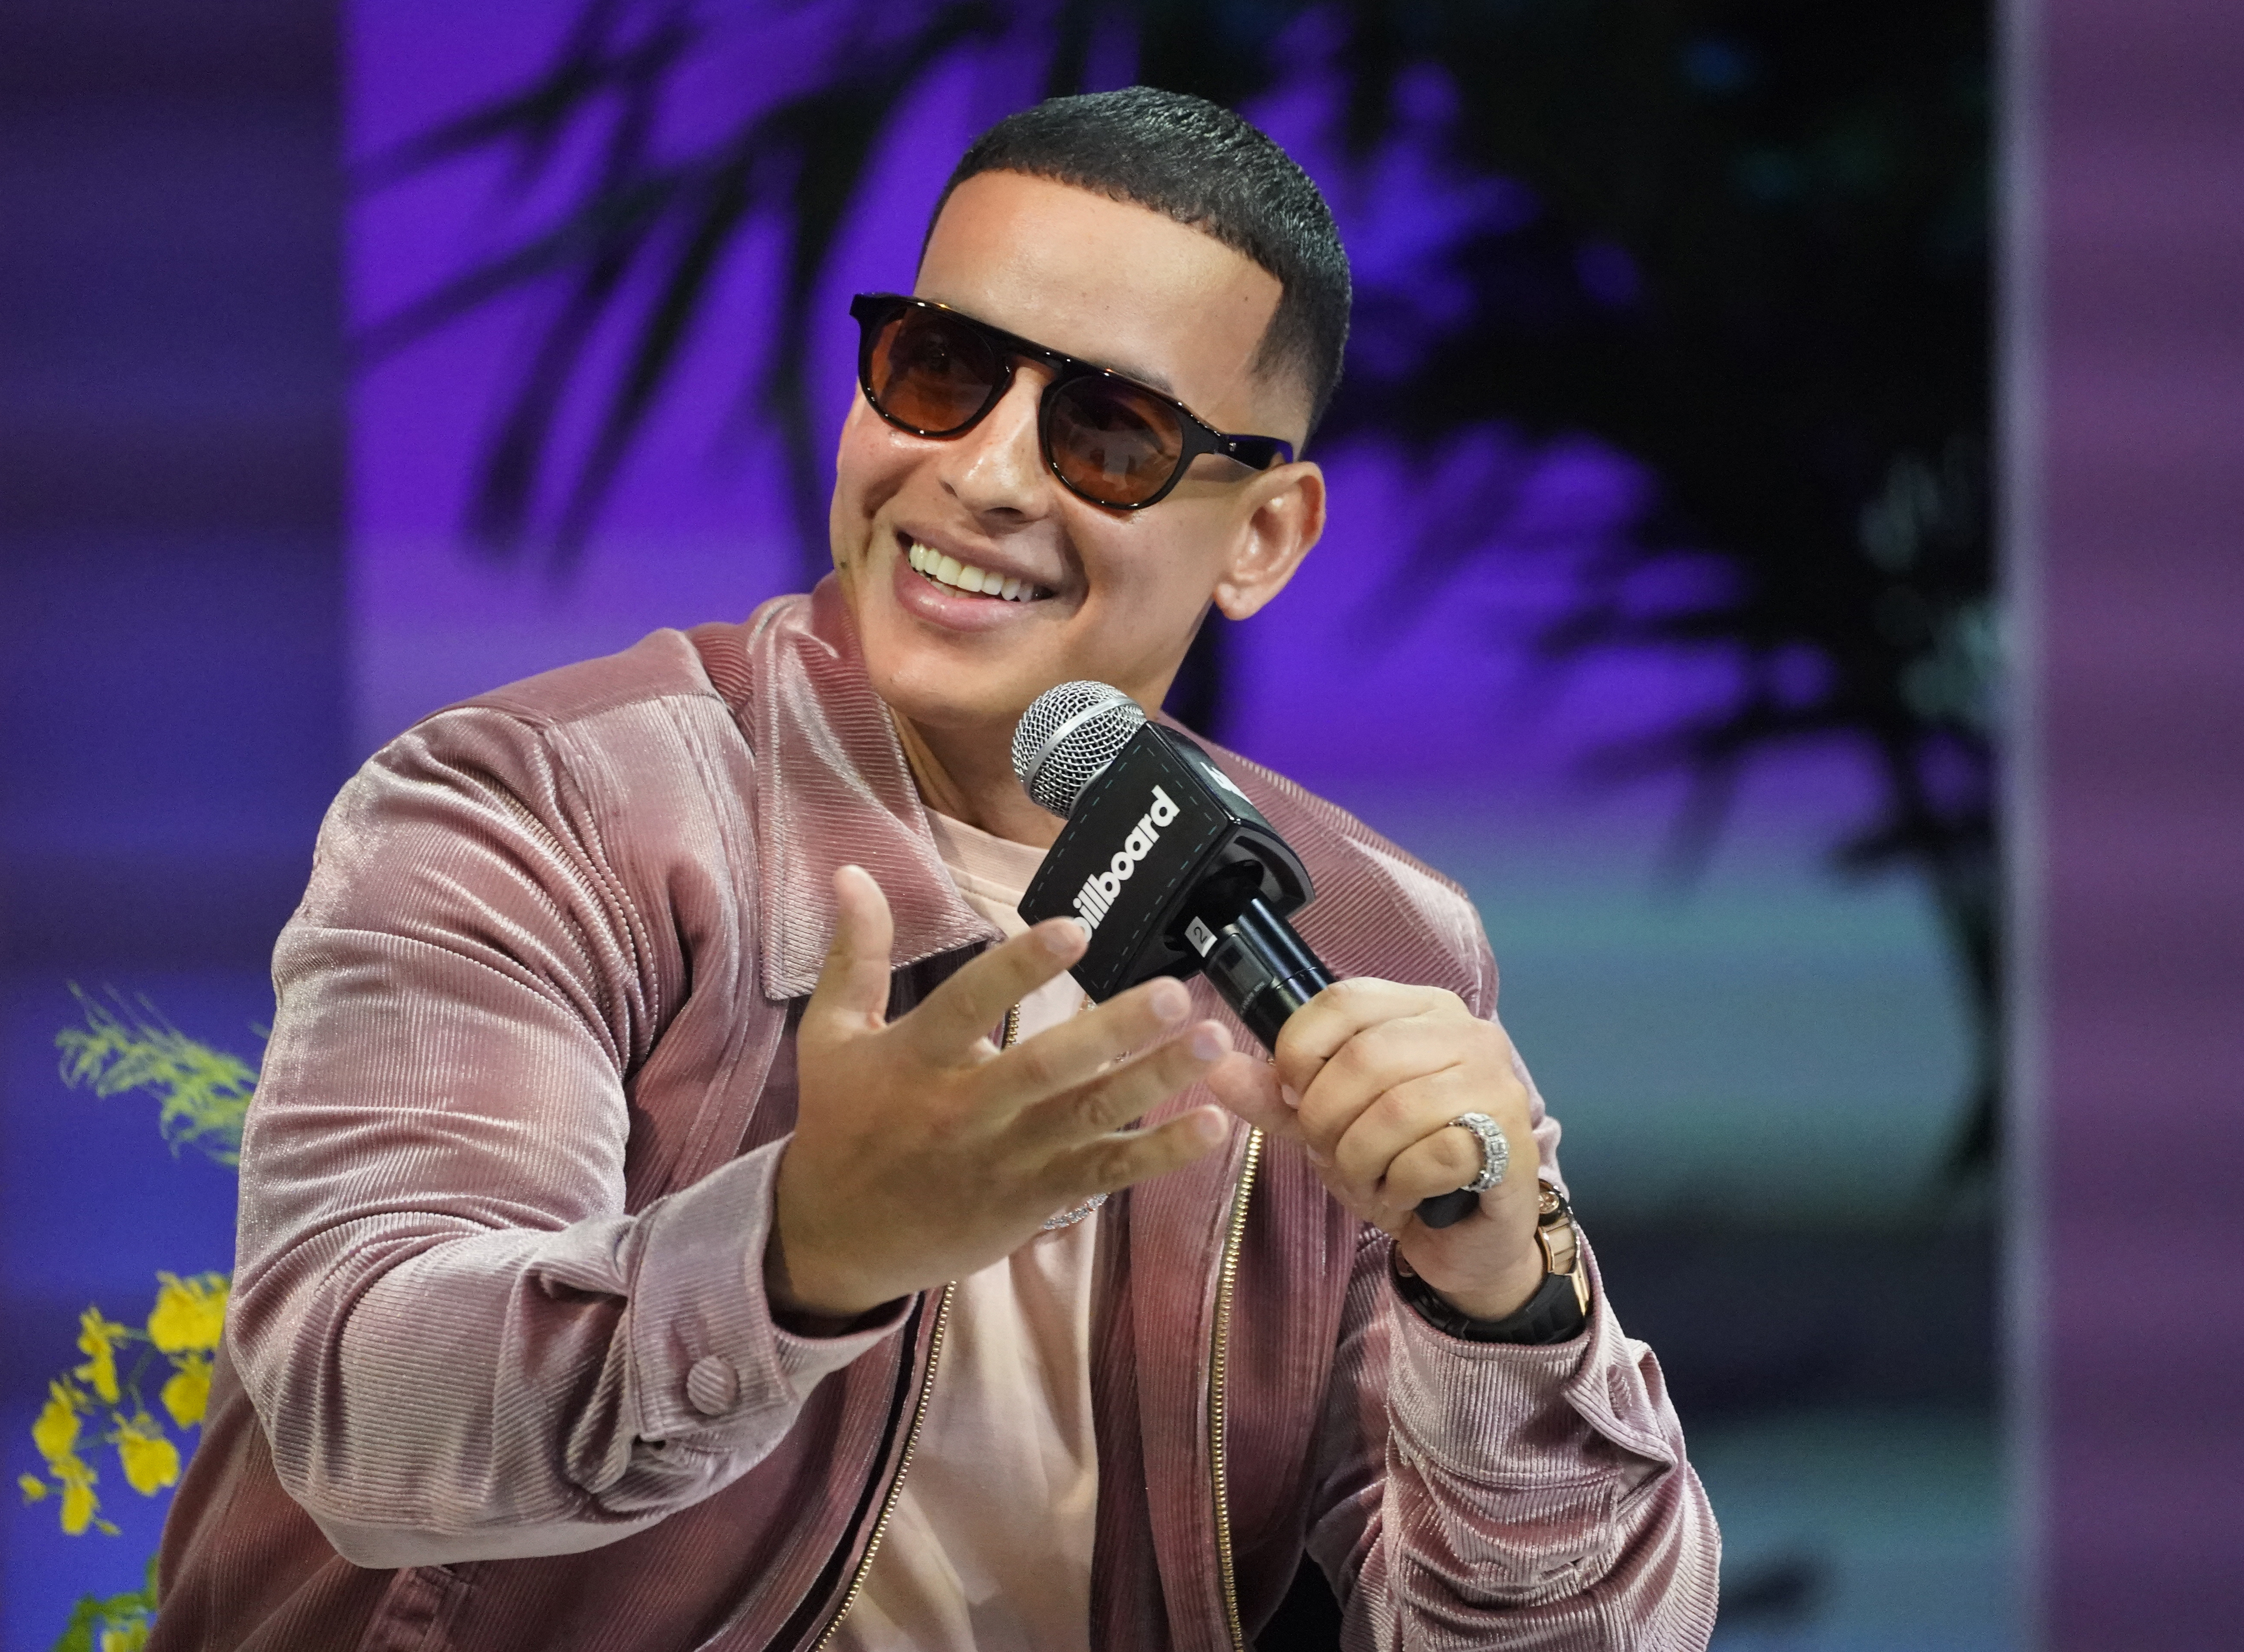 A 90-year-old Grandma's Wish to Meet Daddy Yankee Comes True